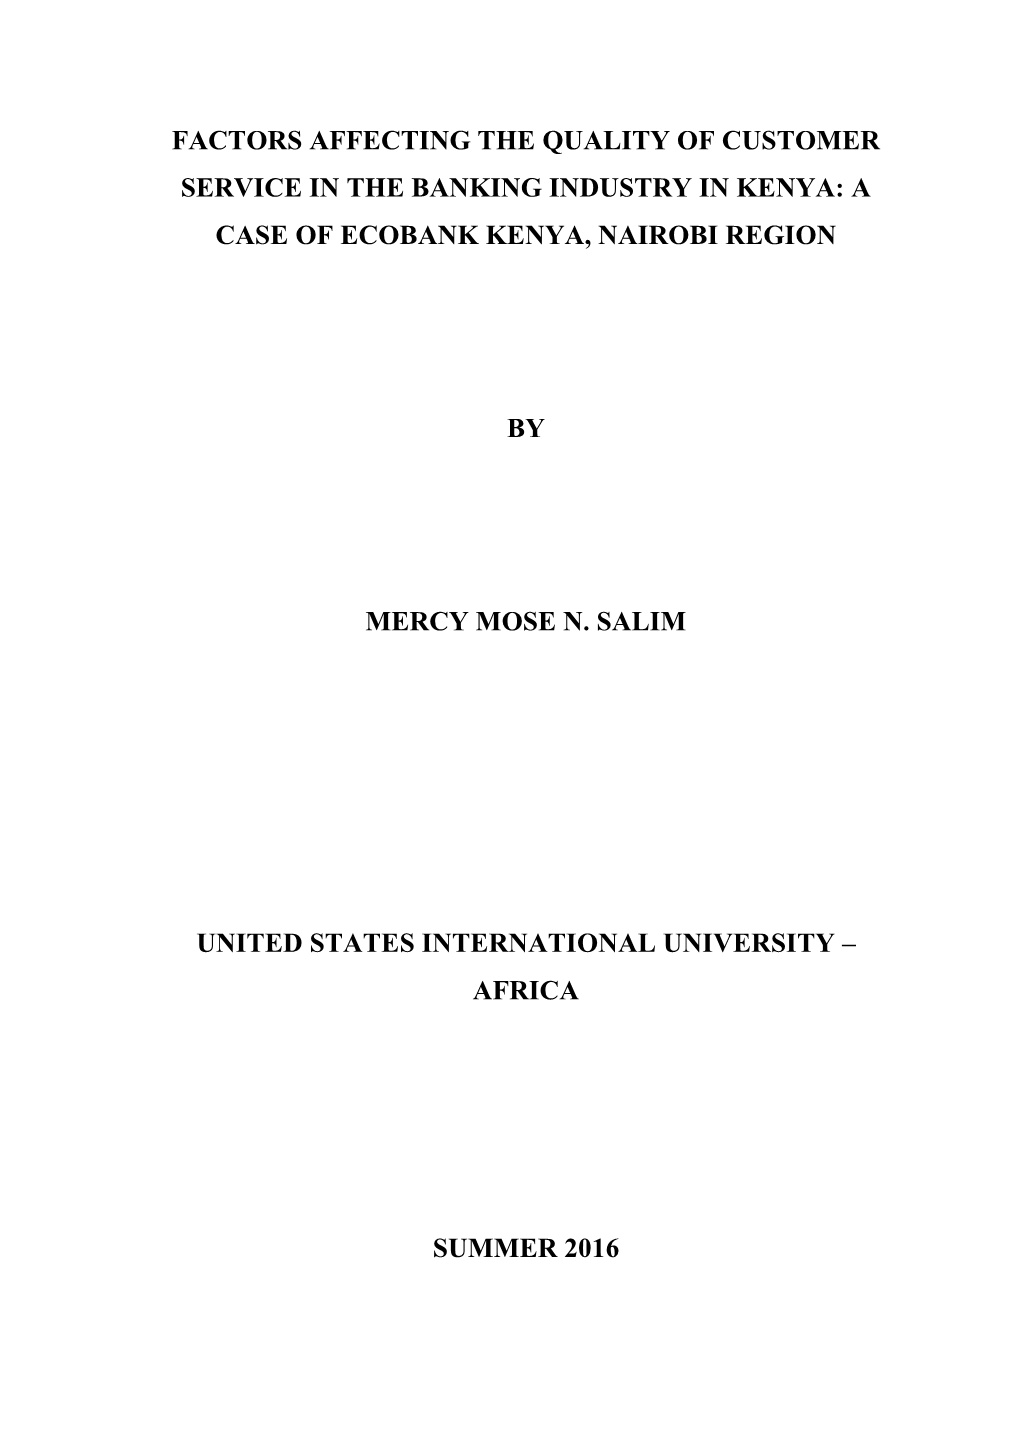 Factors Affecting the Quality of Customer Service in the Banking Industry in Kenya: a Case of Ecobank Kenya, Nairobi Region